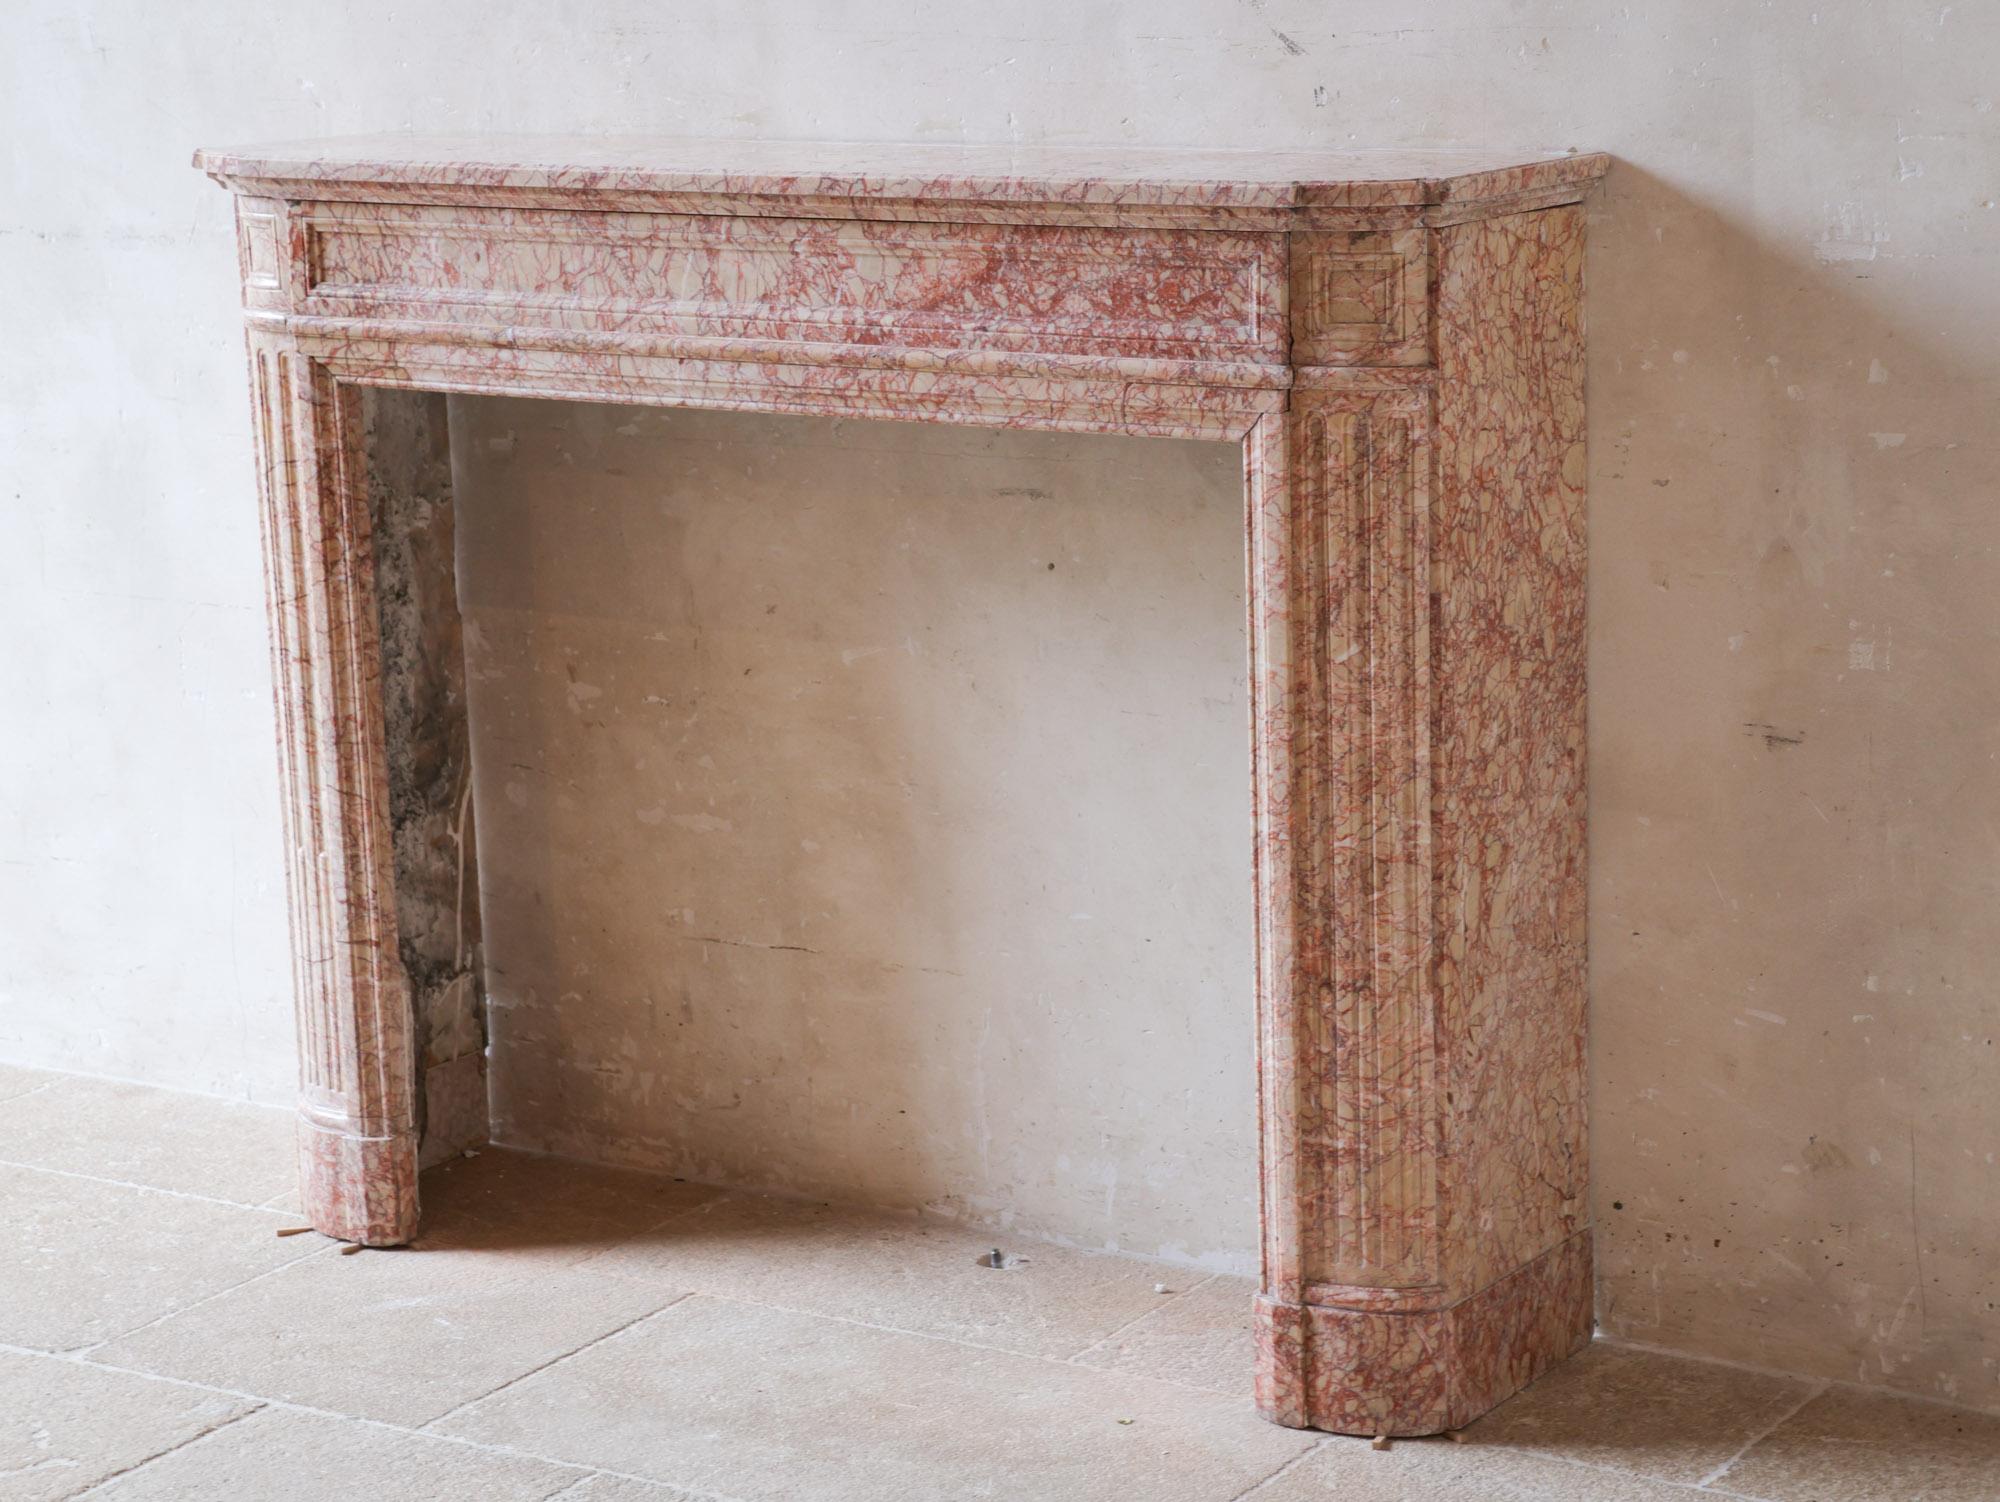 Antique French marble fireplace in pink tones. A 19th century Demi Lune Louis XVI mantelpiece in Trets marble, with fluted jambs and frieze panels.

Dimensions: h 106 x w 136 x d 35 cm
Inner dimensions: h 85 x w 90 cm